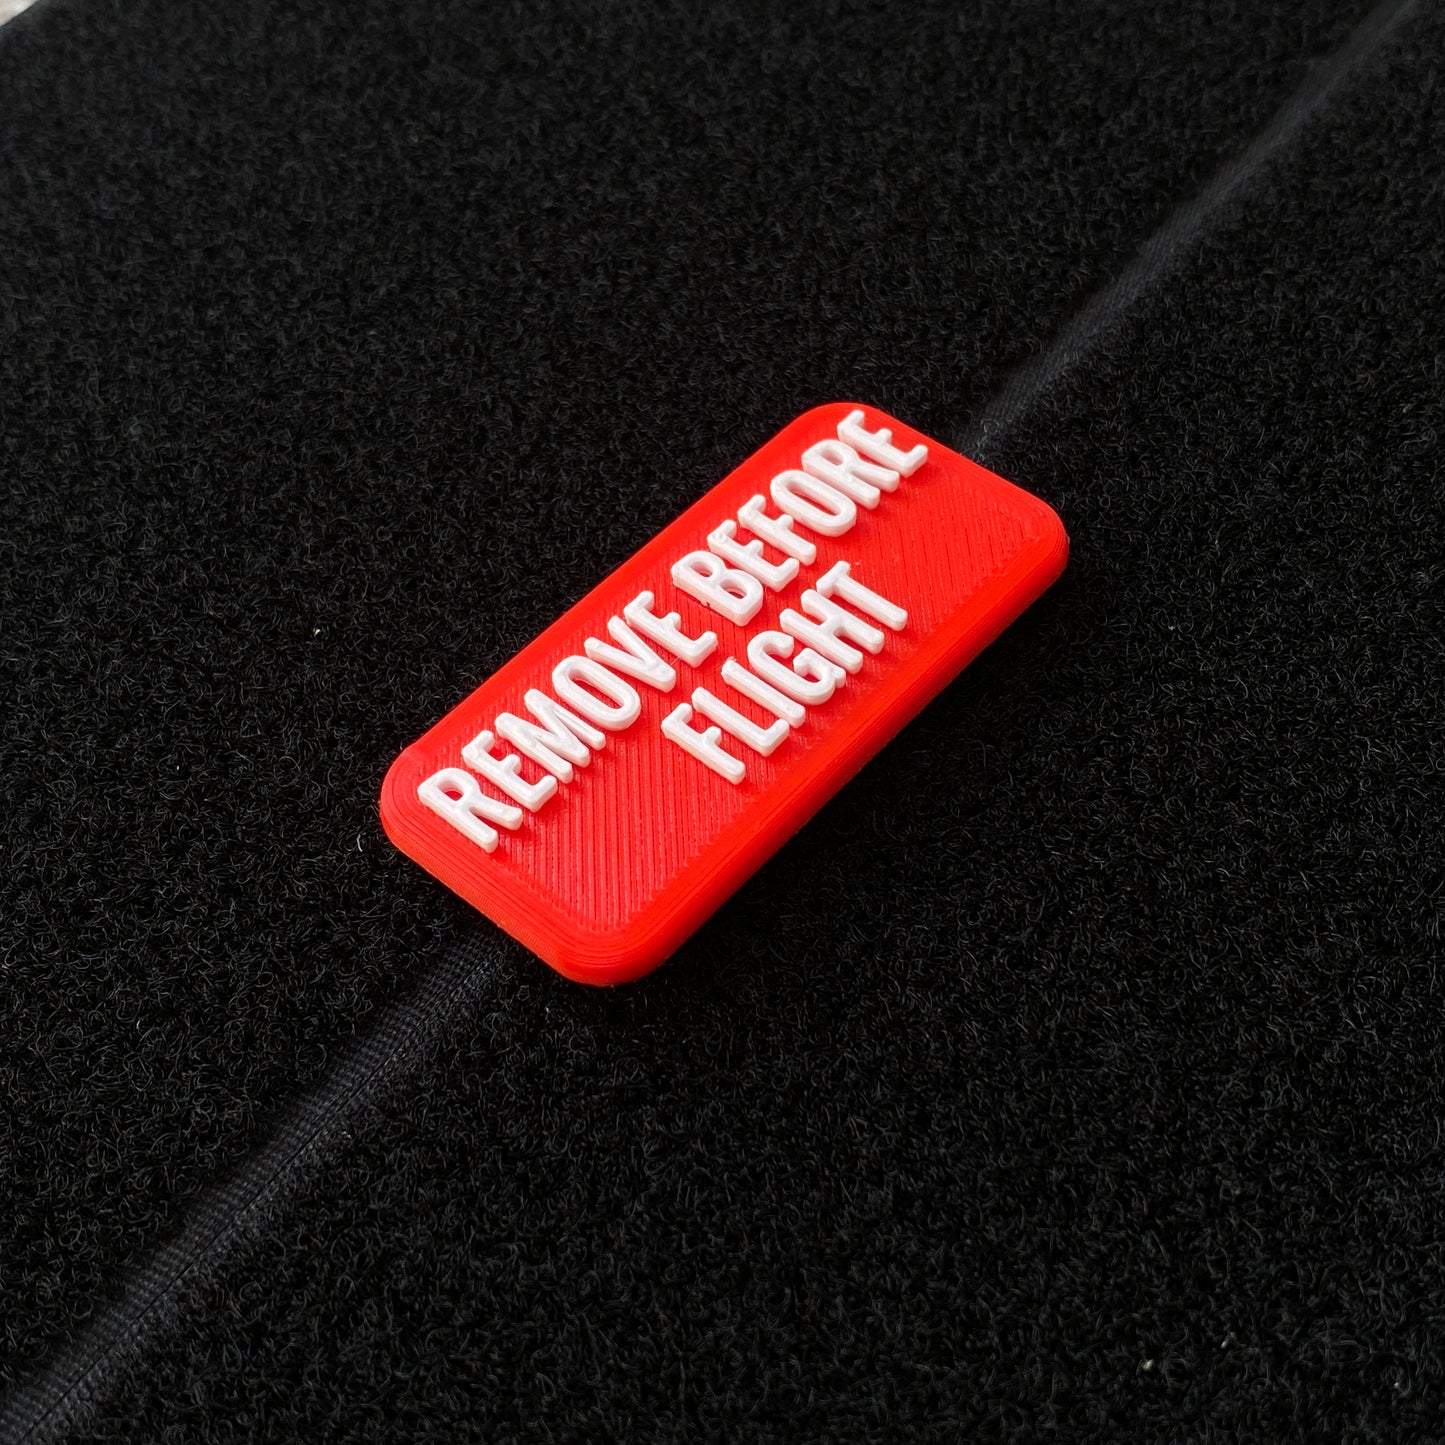 Remove Before Flight Velcro Patches - 1x2